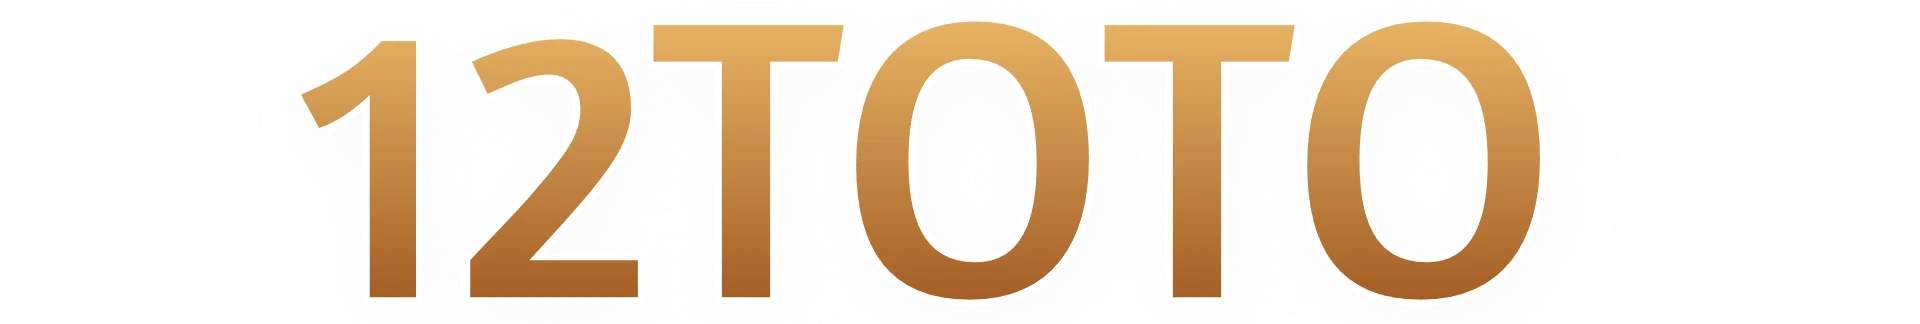 12TOTO